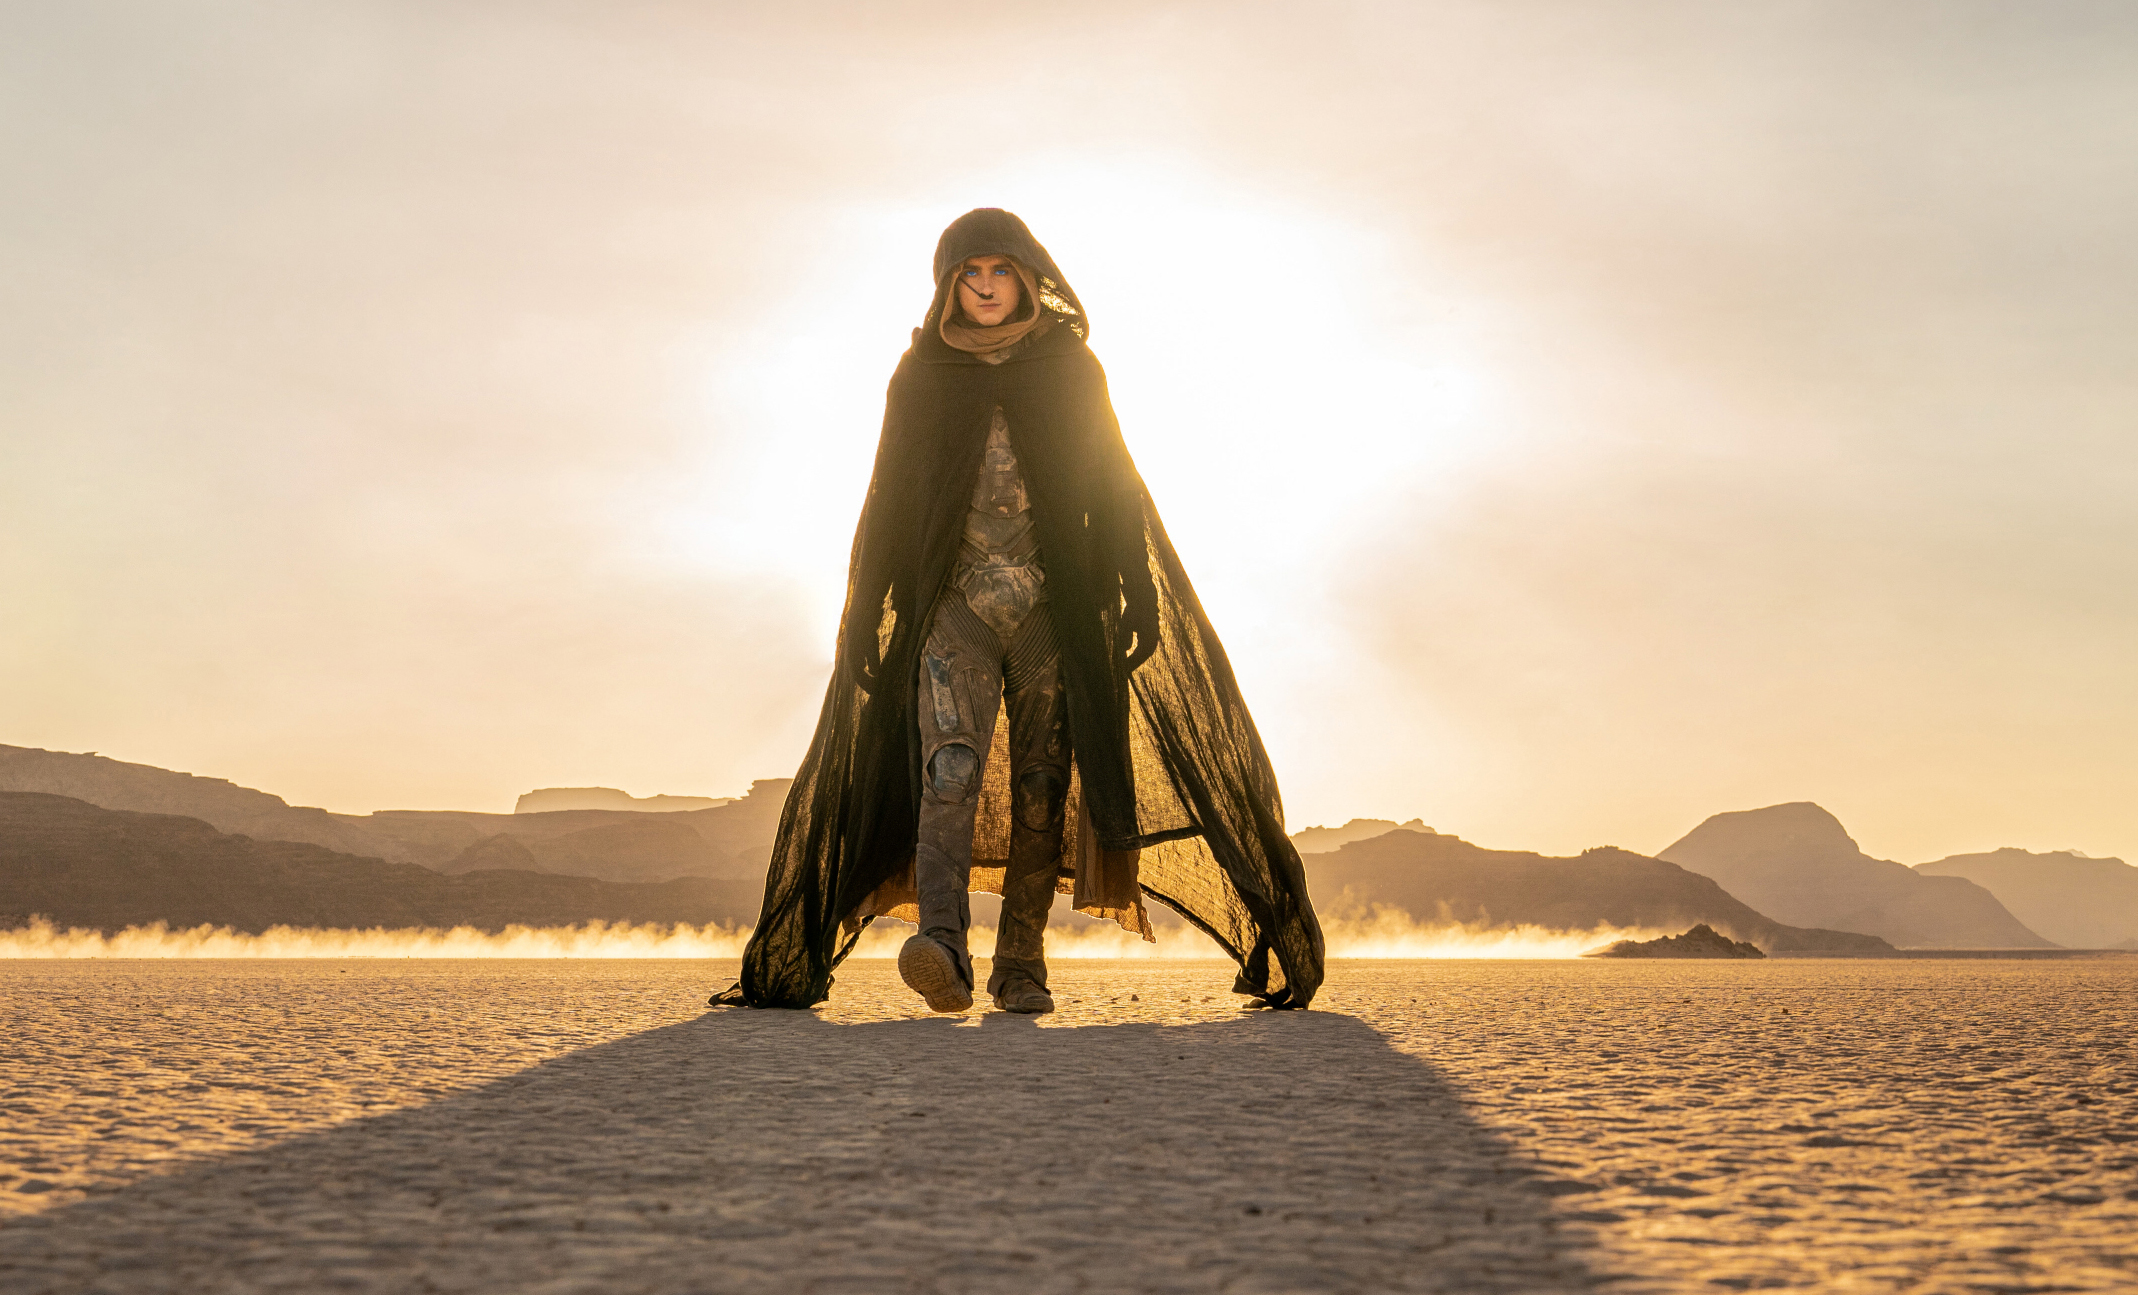 <p>We're looking back at all the new films we've loved and loathed so far this year -- from "Dune: Part Two" to "Madame Web" and everything in between.</p><p>Join us as we count down the 18 most buzzed-about movies to debut in 2024 -- from worst to best -- to see where your most and least favorites rank.</p><p><em>Keep reading to begin the countdown...</em></p><p>MORE: <a href="https://www.msn.com/en-us/community/channel/vid-kwt2e0544658wubk9hsb0rpvnfkttmu3tuj7uq3i4wuywgbakeva?item=flights%3Aprg-tipsubsc-v1a&ocid=social-peregrine&cvid=333aa5de5a654aa7a98a6930005e8f60&ei=2">Follow Wonderwall on MSN for more fun celebrity & entertainment photo galleries and content</a></p>